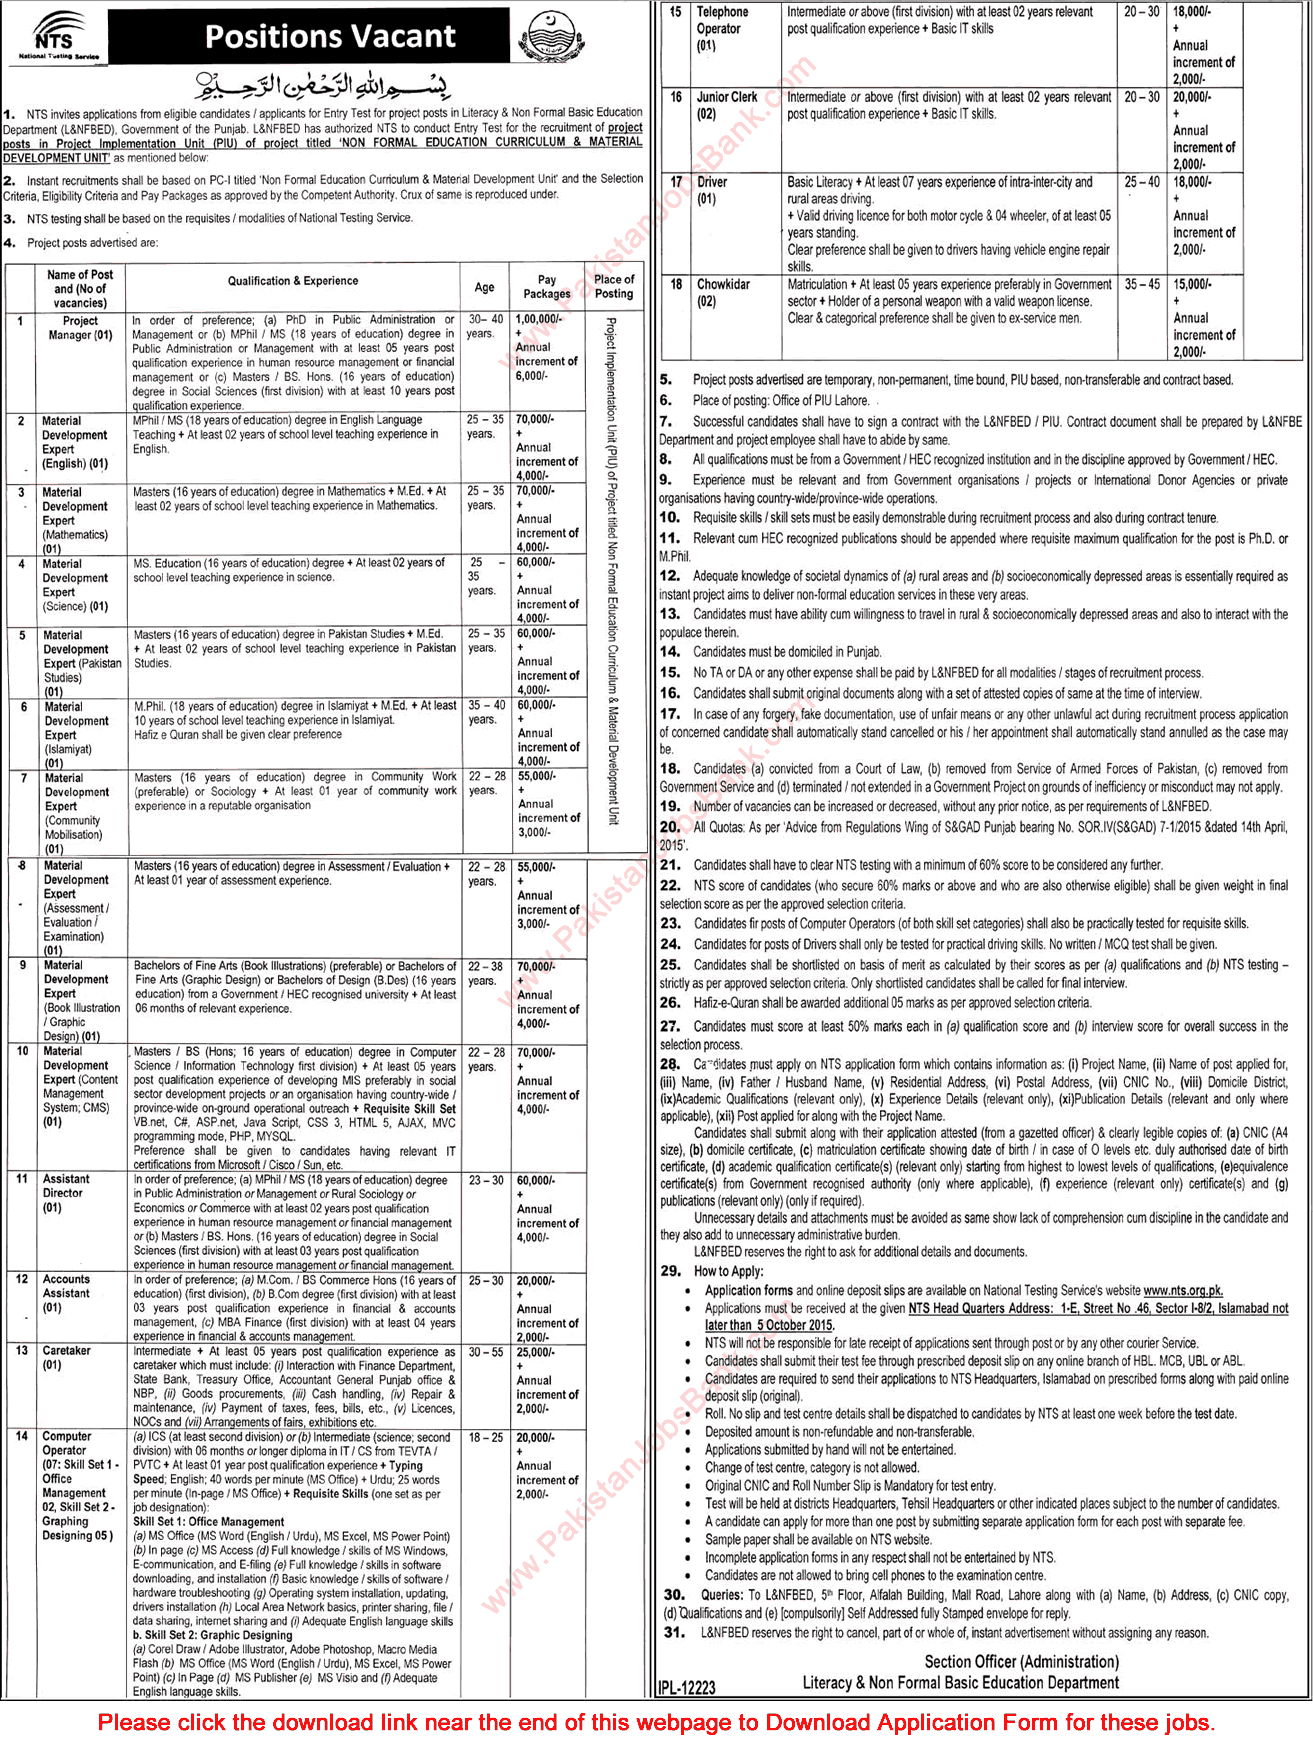 Literacy & NFBE Department Lahore Jobs 2015 September NTS Application Form Material Development Experts & Others